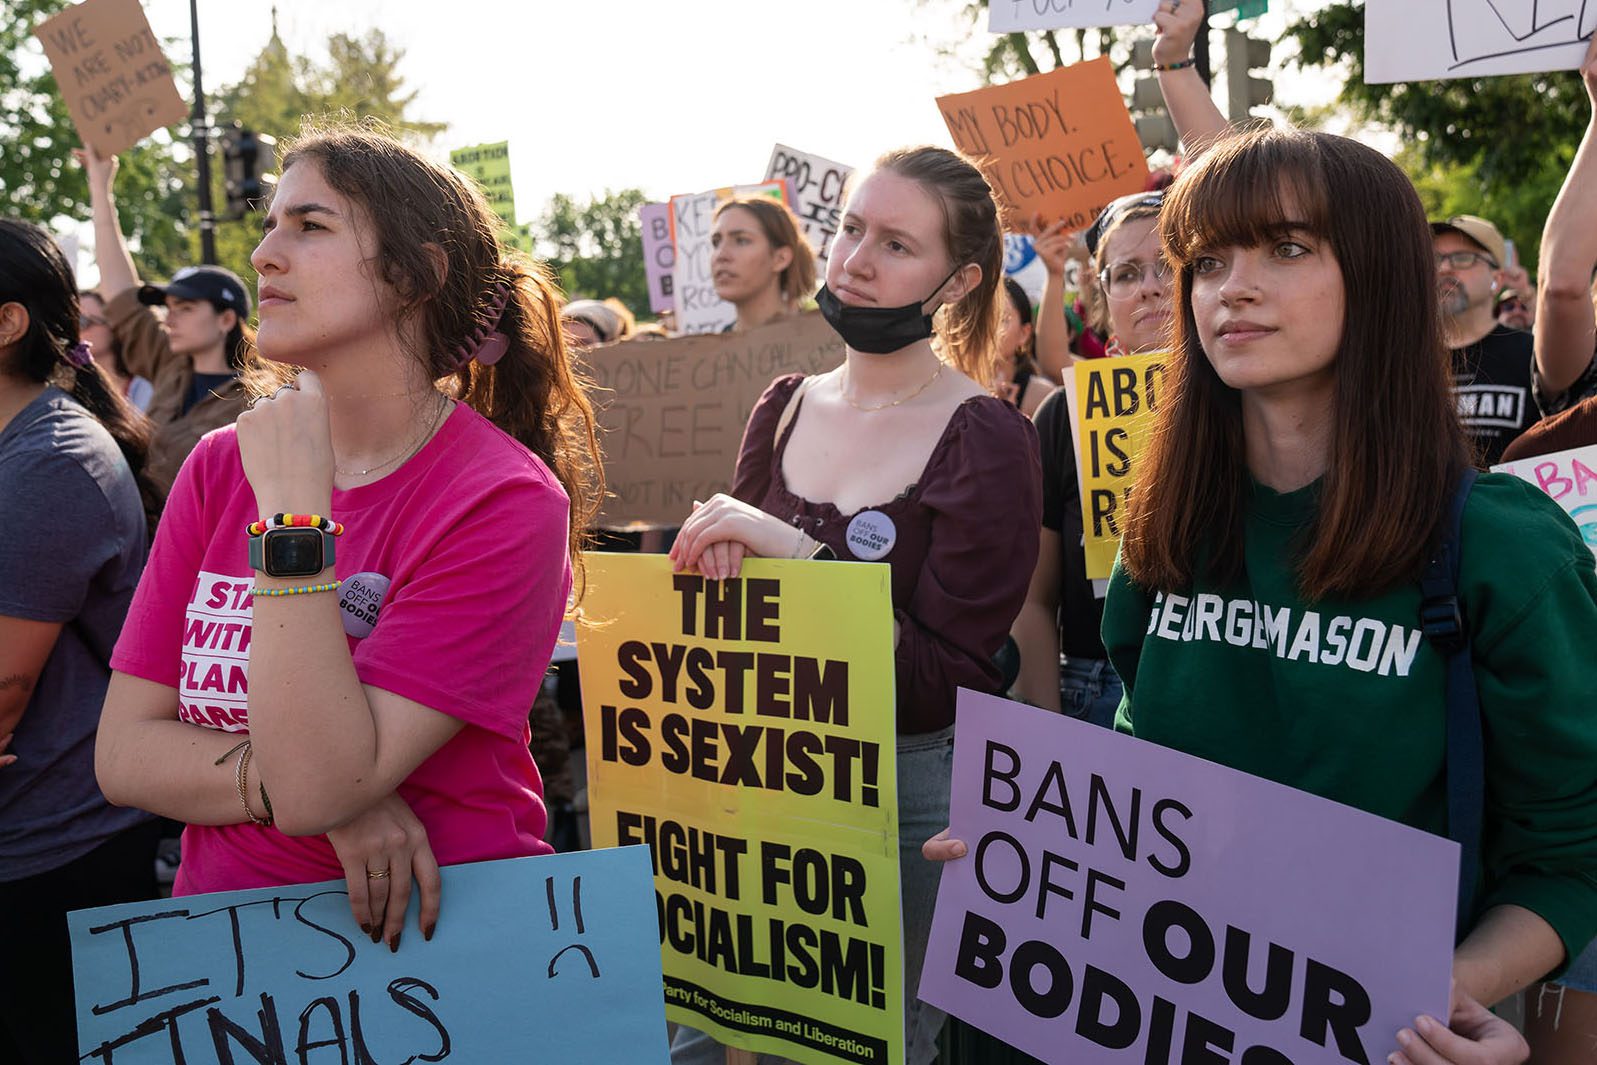 Demonstrators hold signs that read "the system is sexist! fight for socialism," "bans off our bodies" and "my body, my choice" as they demonstrate in front of the Supreme Court.